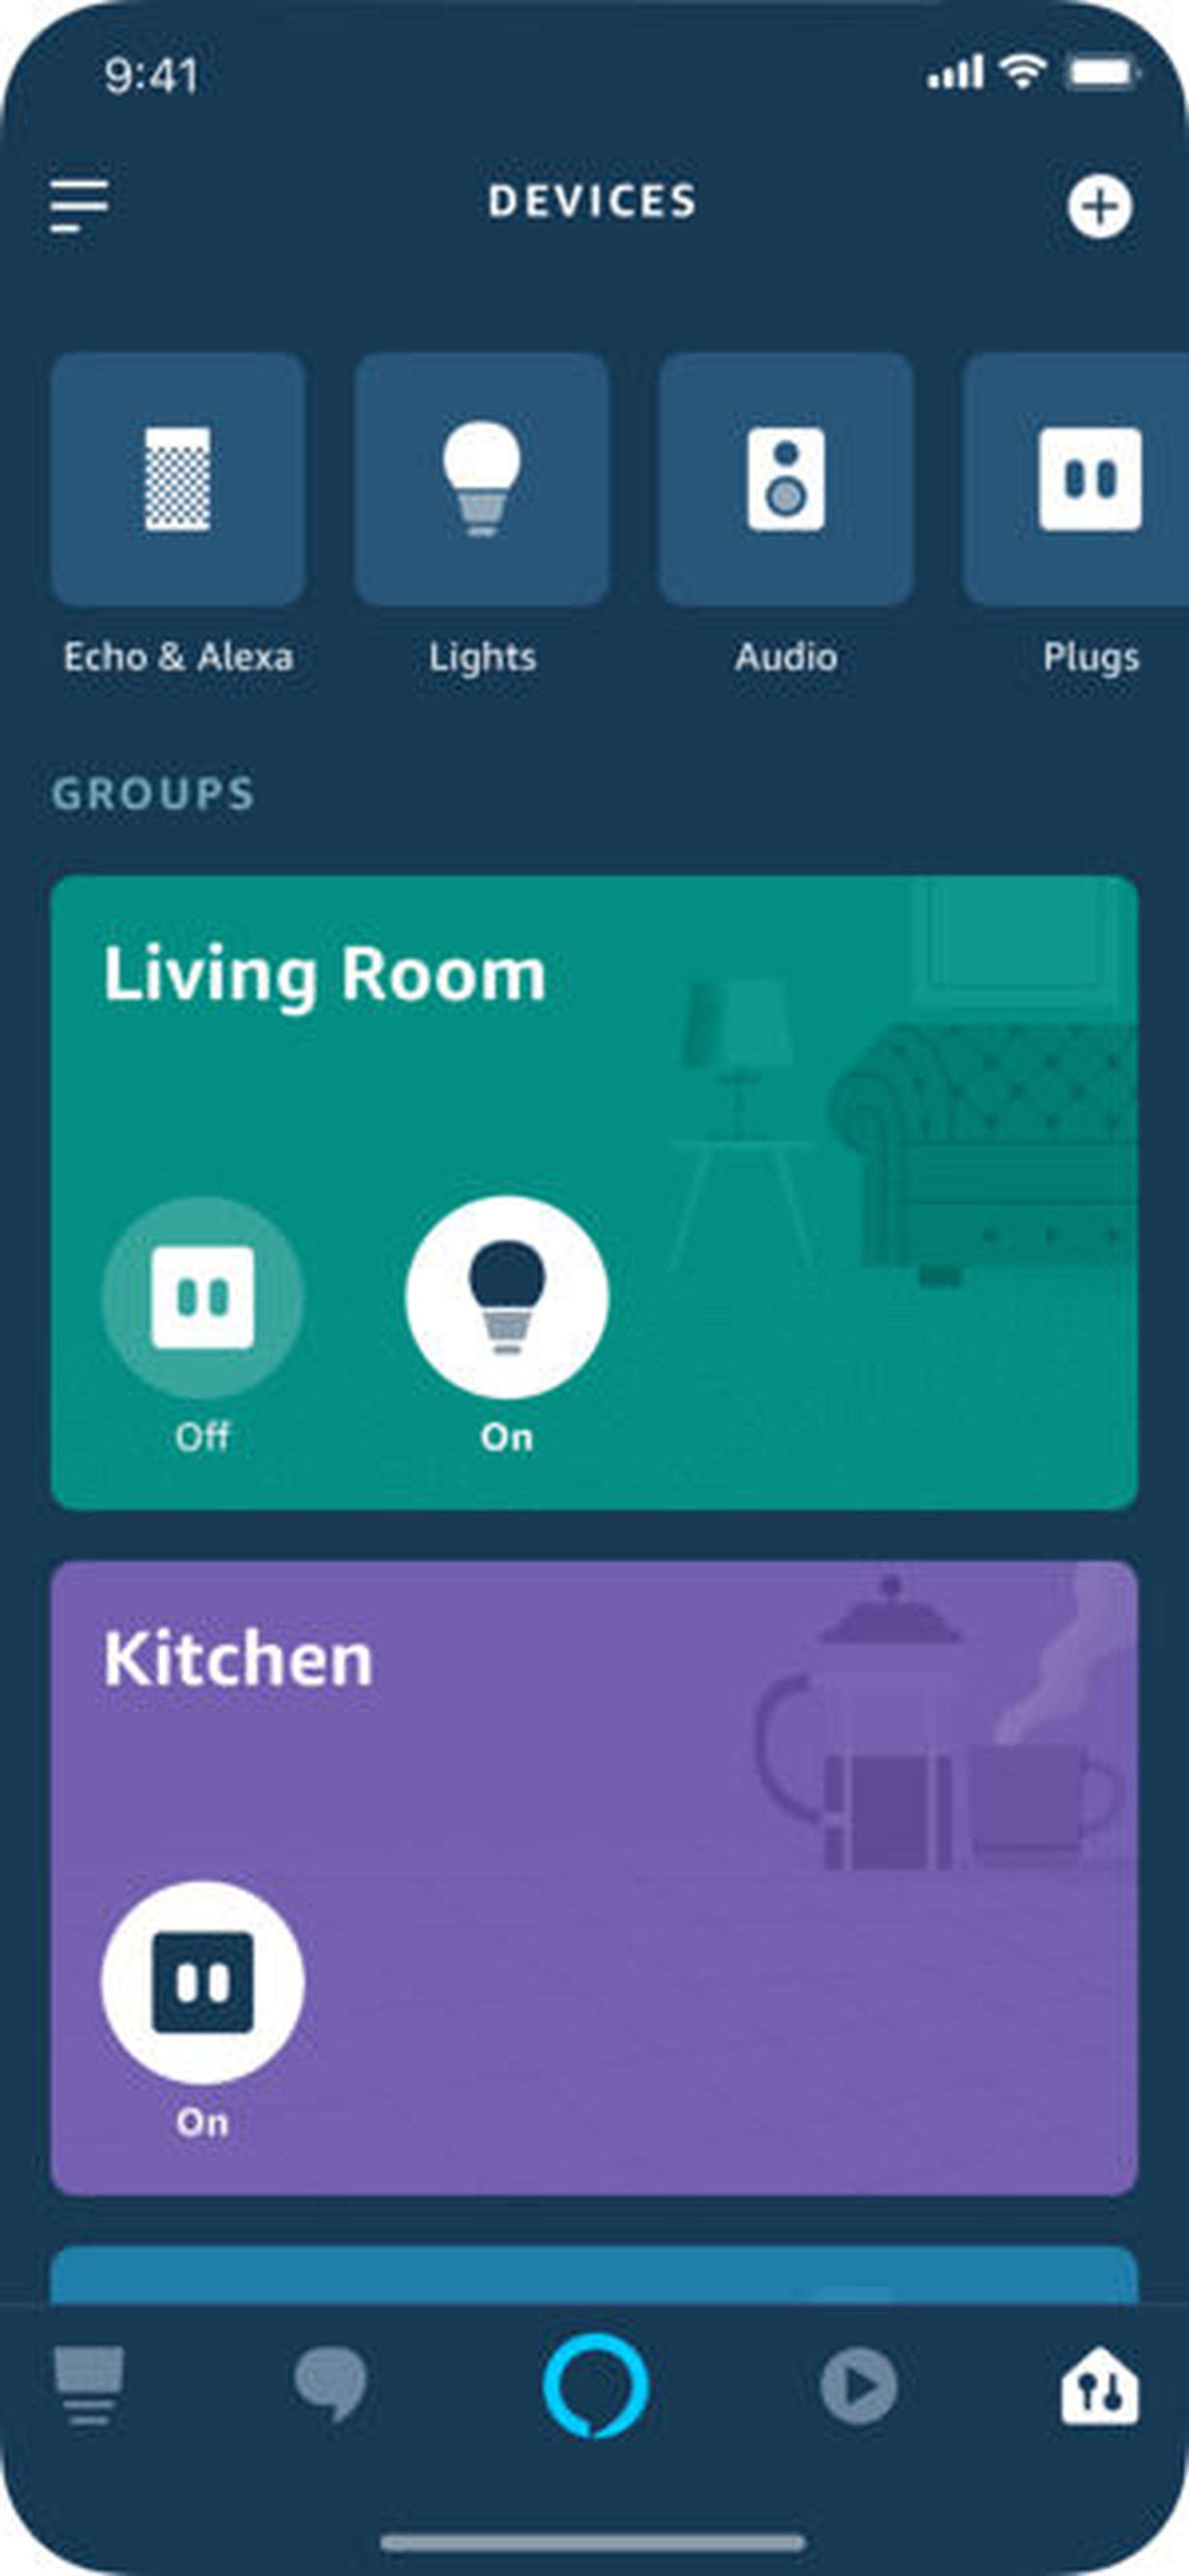 Devices can be seen grouped by room, and can be toggled from a single screen. 